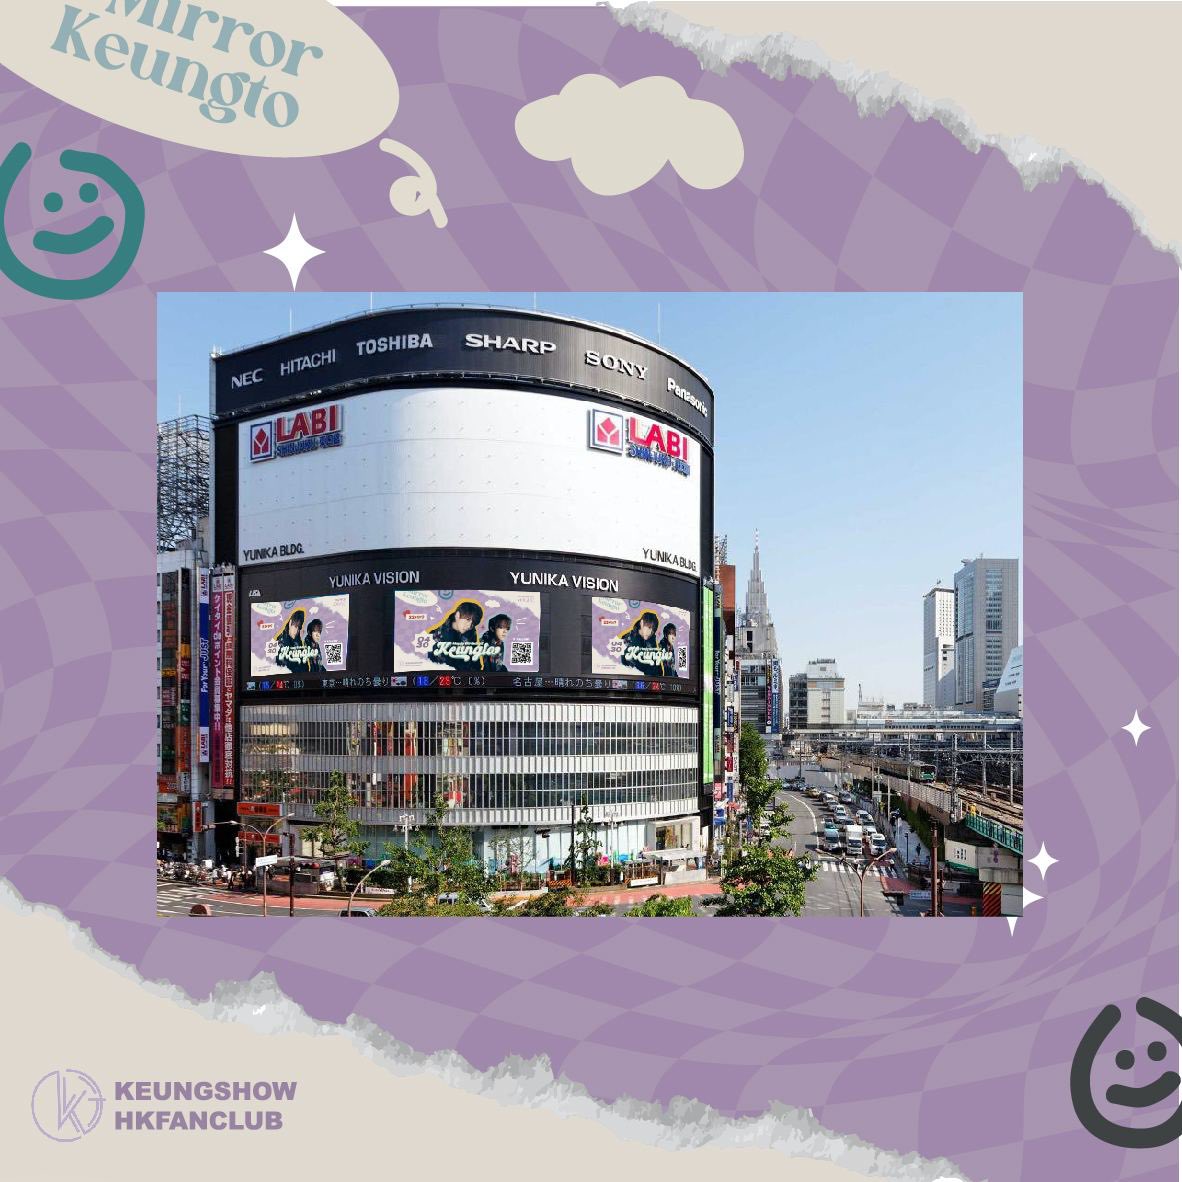 #HAPPYKT430DAY ❤️🎉 Keung To 23rd Birthday Global Support 4. JAPAN 🇯🇵 Duration: 1 Week (28 April – 4 May 2022) 📍東京 新宿 クロス新宿ビジョン 📍東京 新宿 Yunika vision